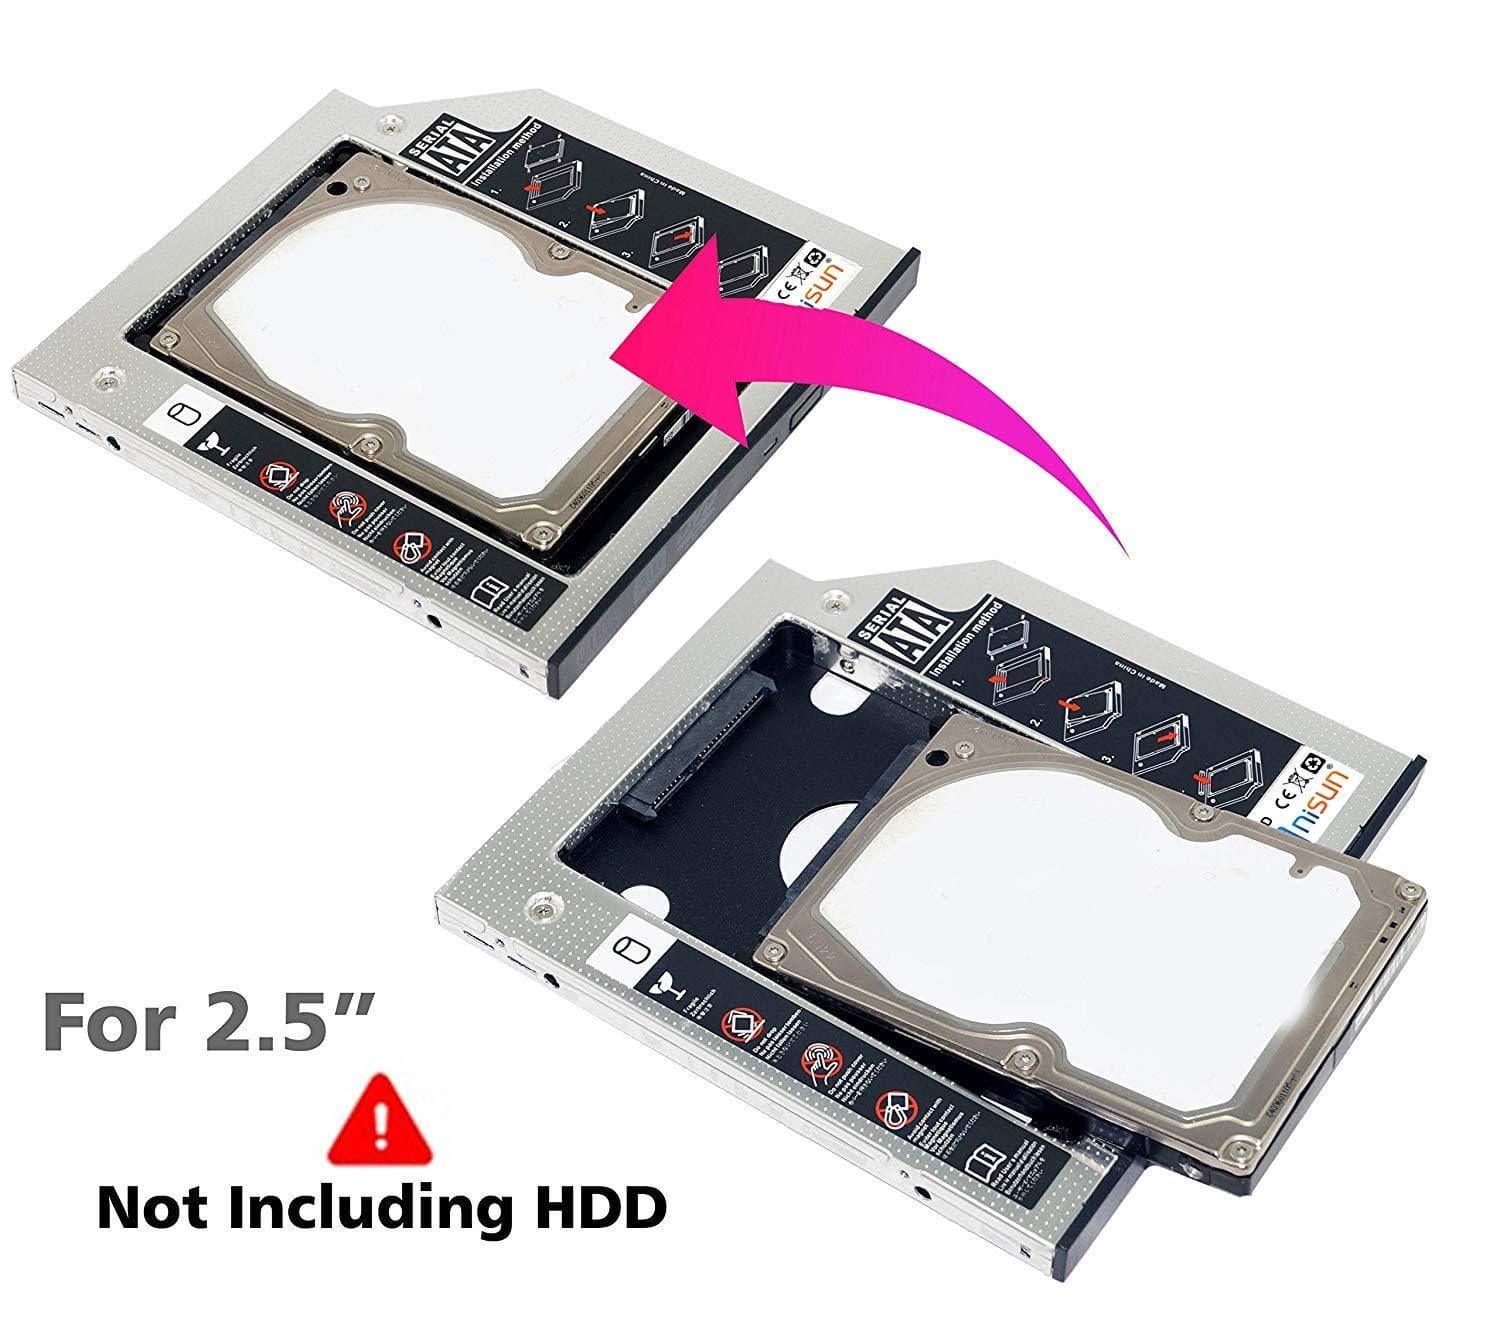 CARE CASE® Optical Bay 2nd Hard Drive Caddy CD/DVD Drive Slot for SSD and HDD-laptop care-dealsplant